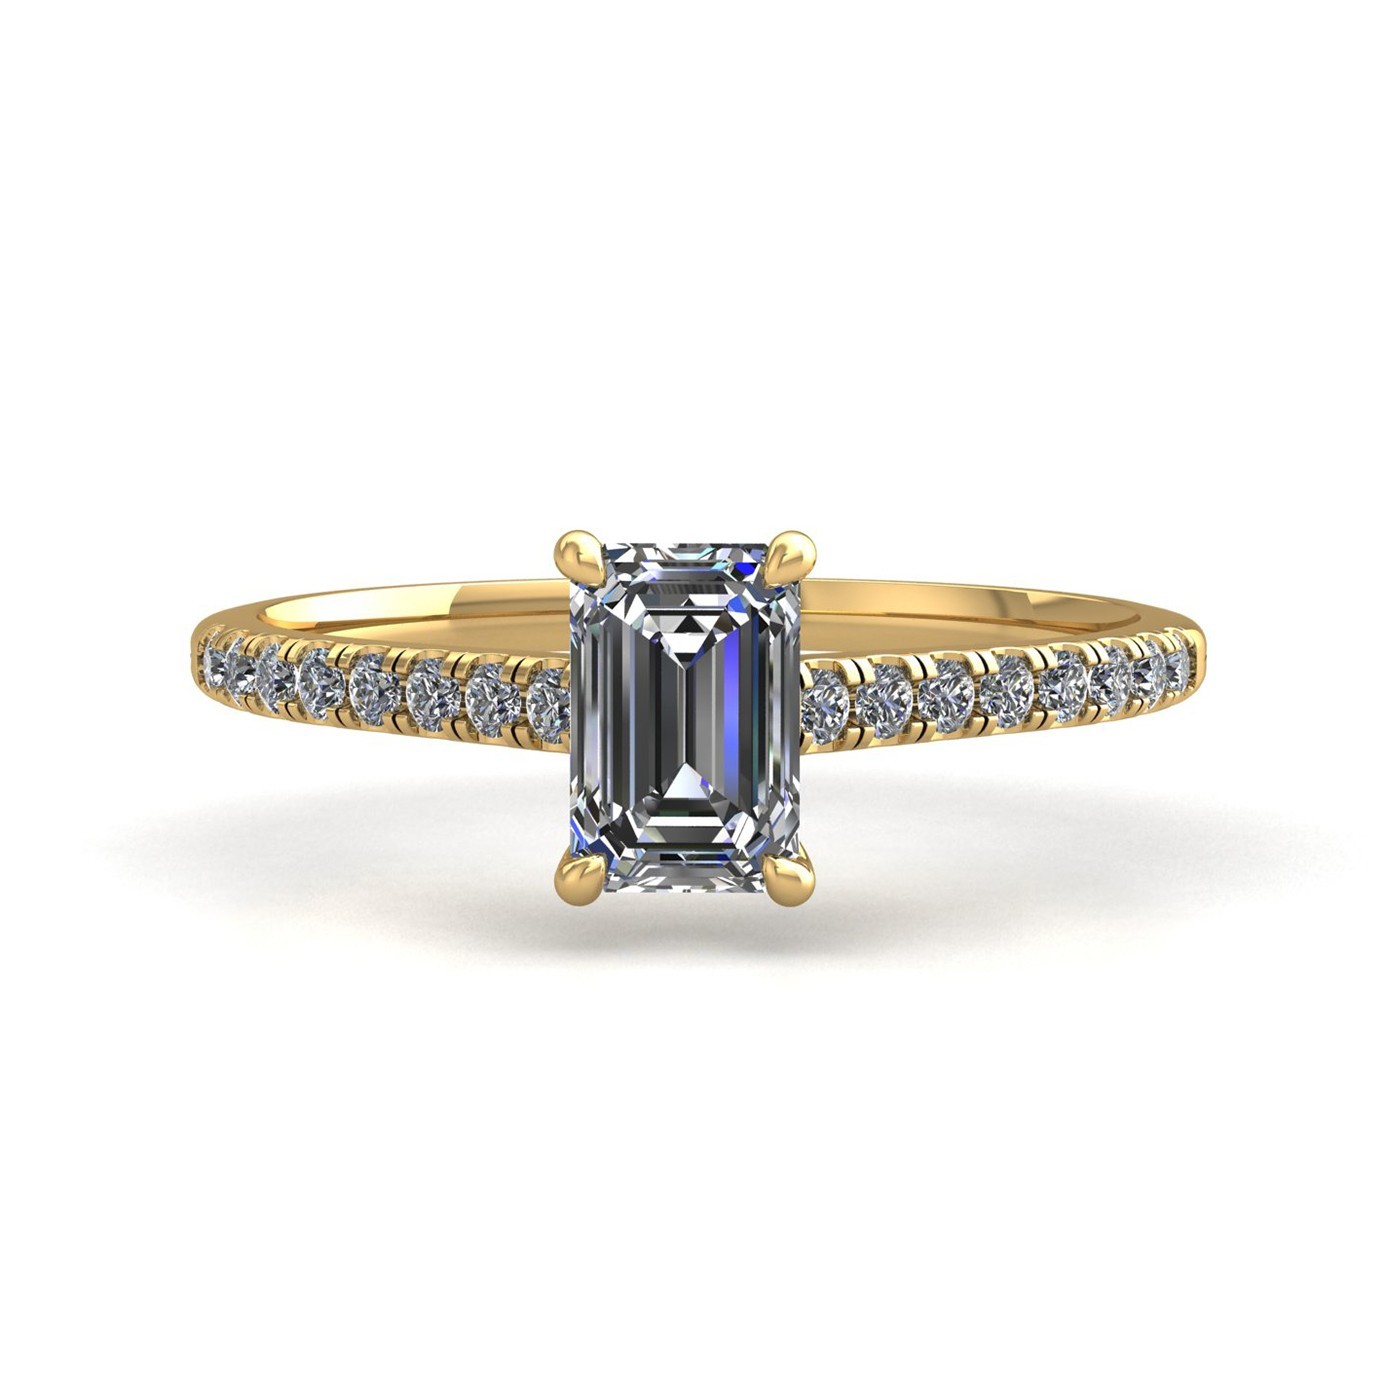 18k yellow gold 2.0ct 4 prongs emerald cut diamond engagement ring with whisper thin pavÉ set band Photos & images